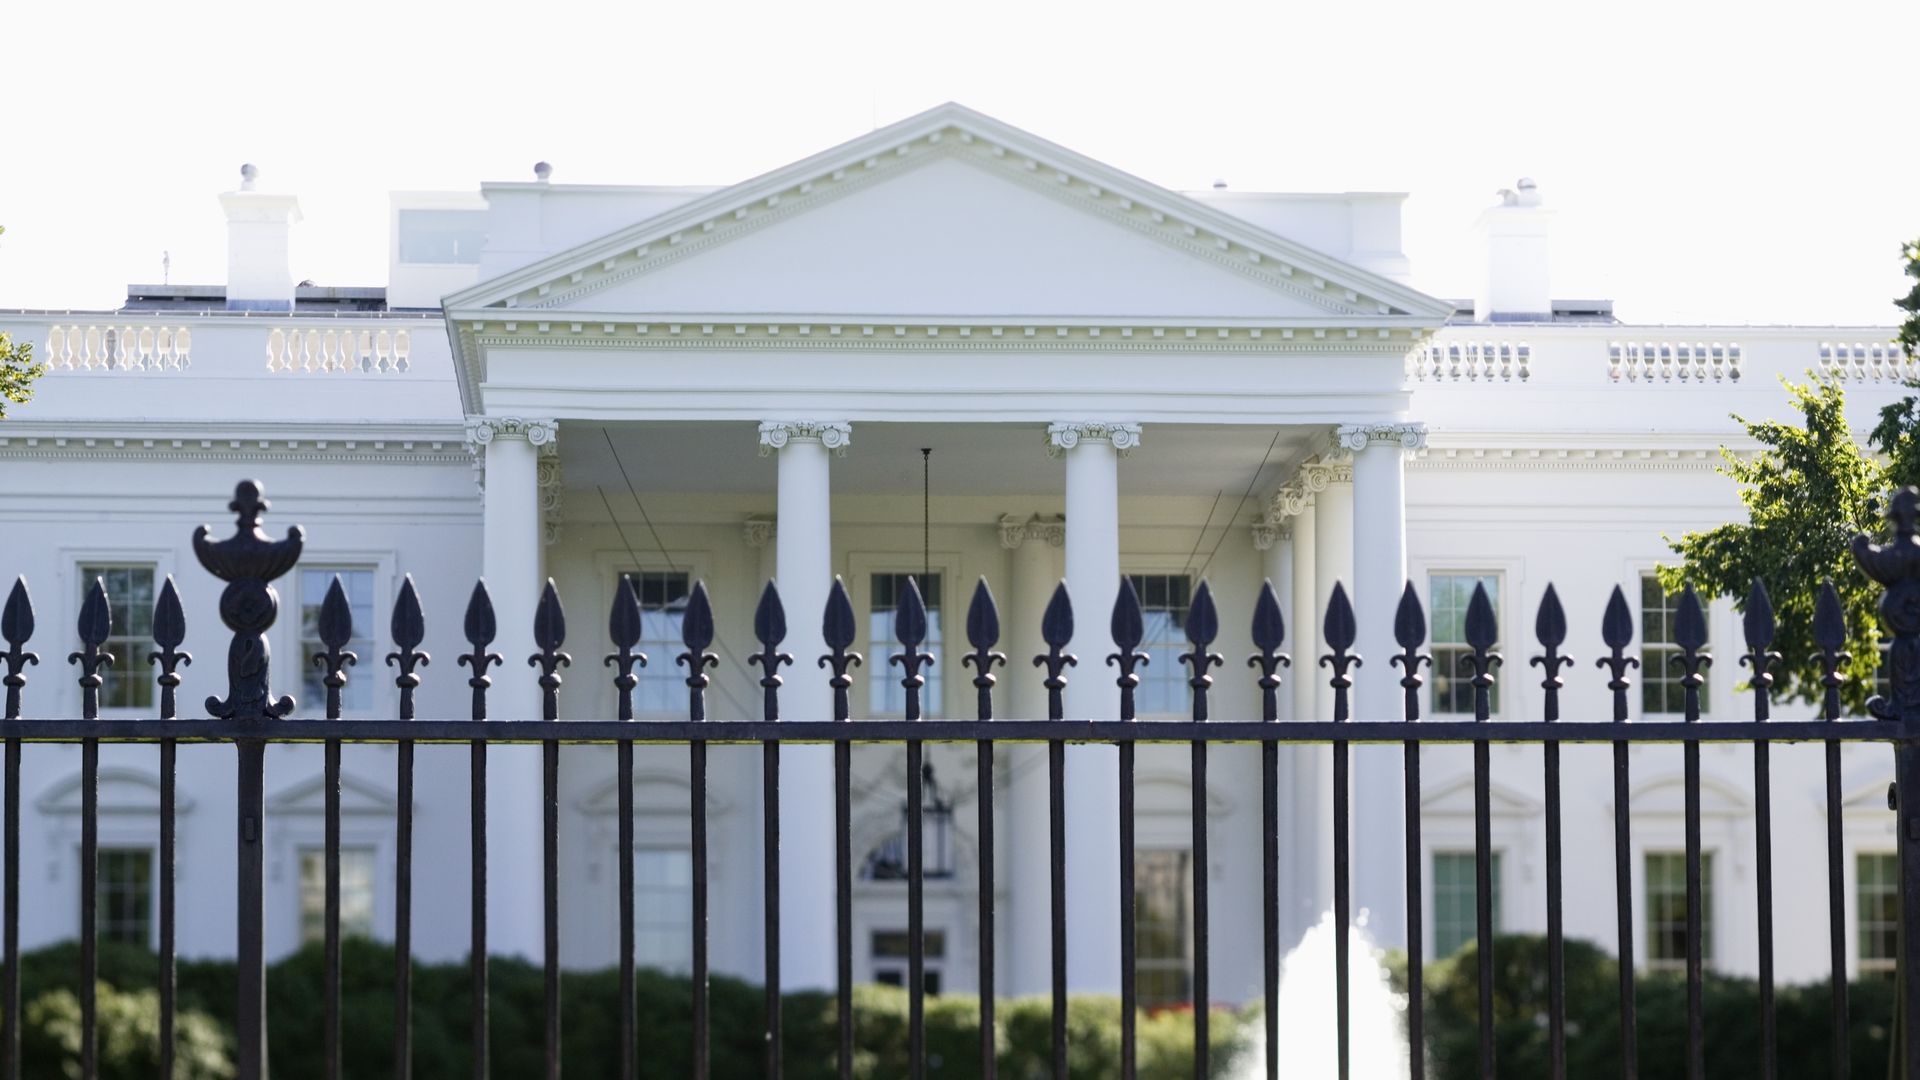 Upclose photo of the White House with a fence in front.